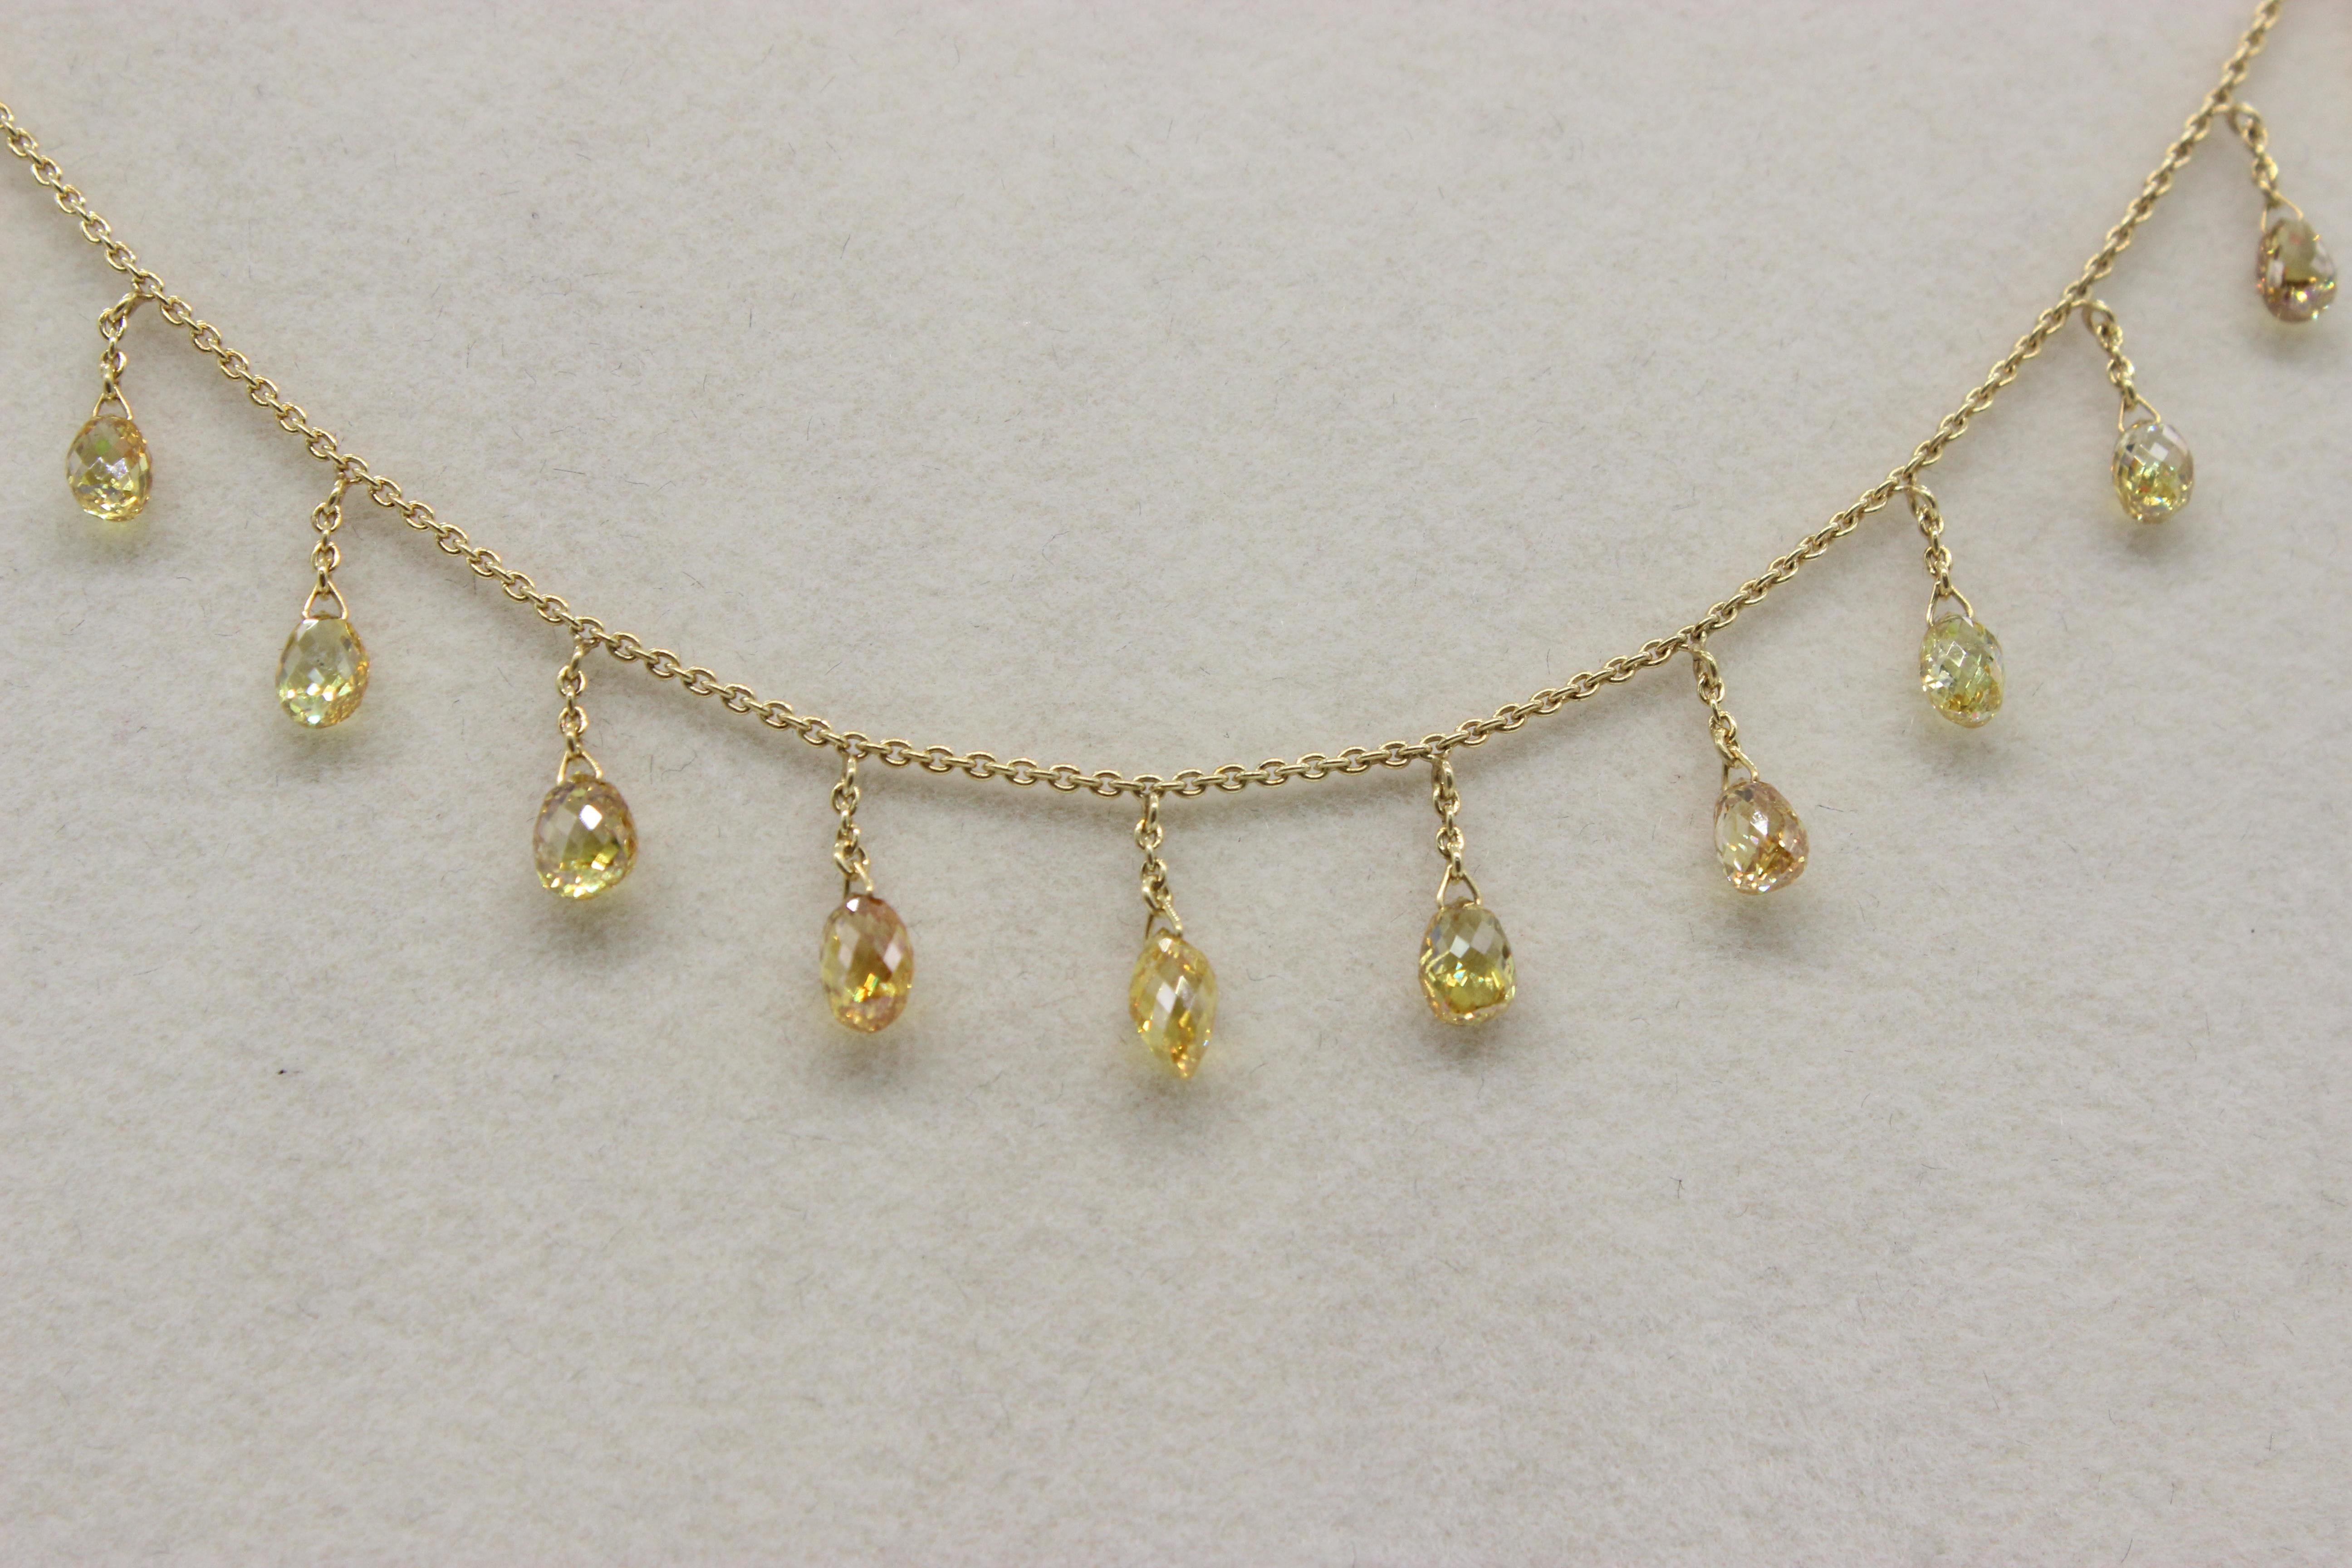 PANIM 5.30 Carat Fancy Color Diamond Briolette 18 Karat Yellow Gold Necklace In New Condition For Sale In Tsim Sha Tsui, Hong Kong